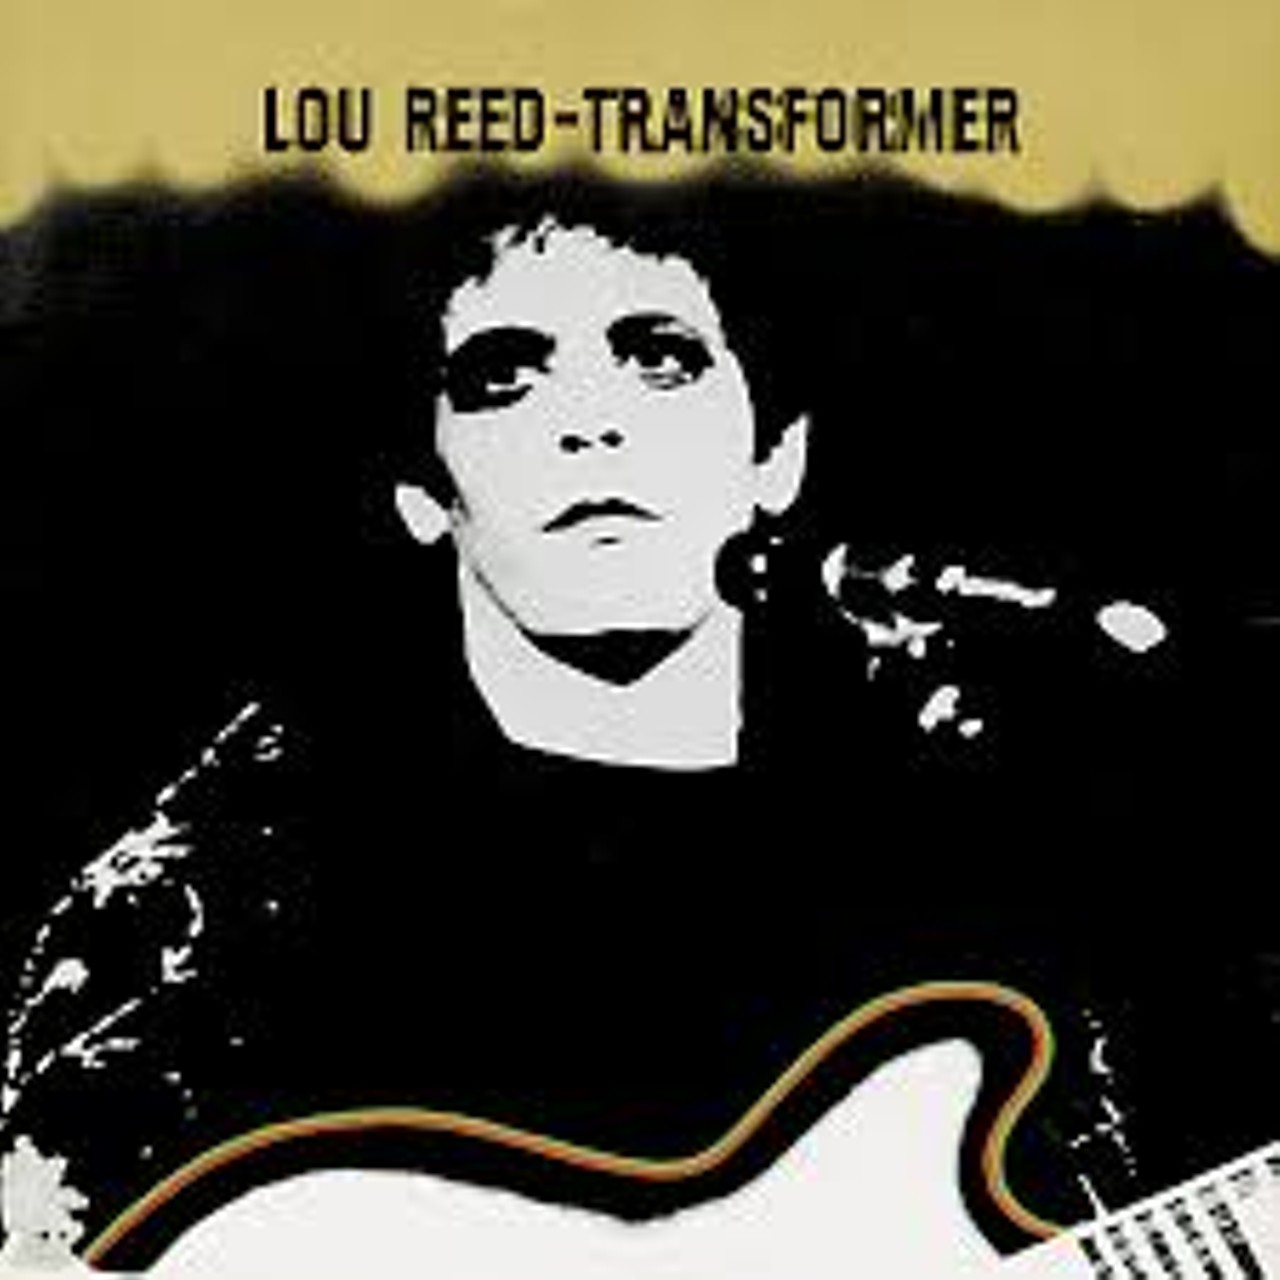 Transformer
As a solo artist, Reed enjoyed huge success with 1972’s Transformer, with singles like “Walk on the Wild Side” and “Satellite of Love.”